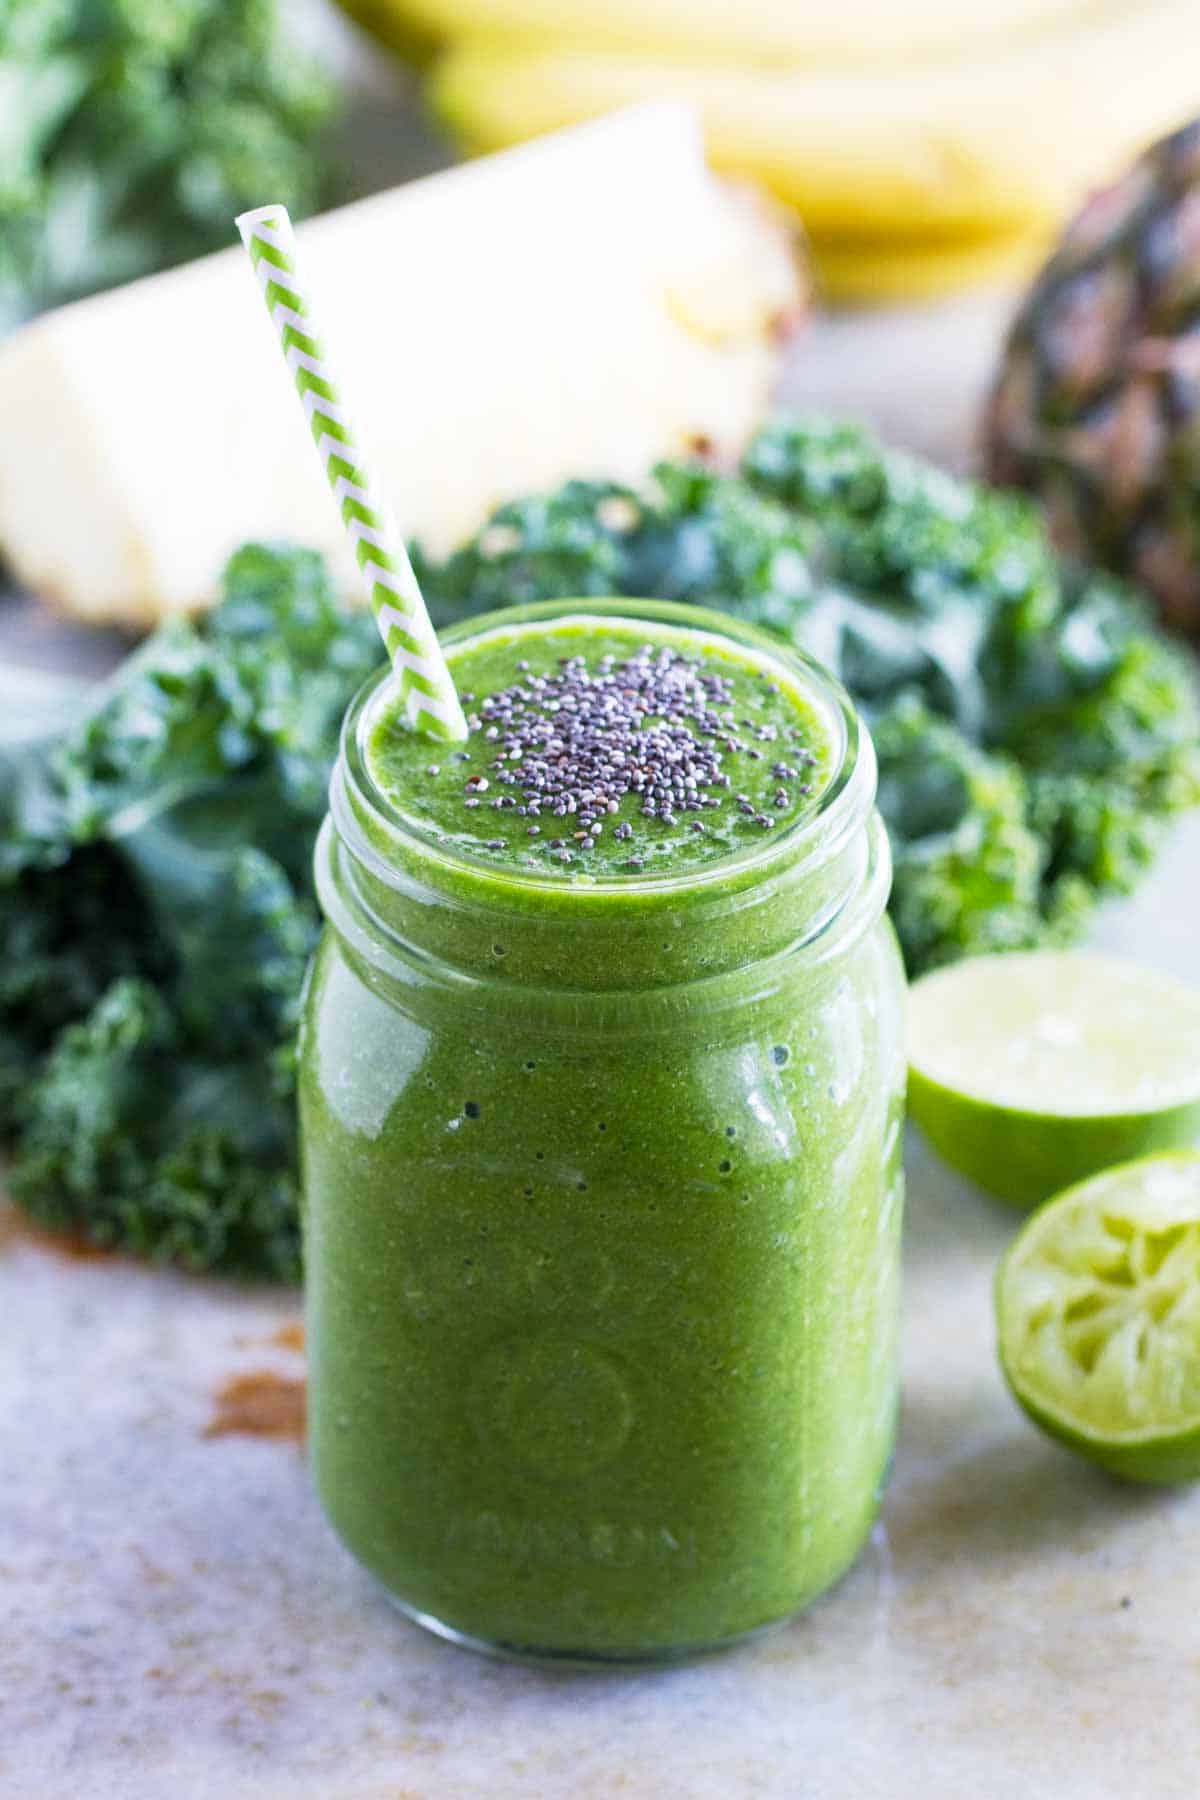 Healthy Pineapple Banana Kale Smoothie Recipe - Taste and Tell